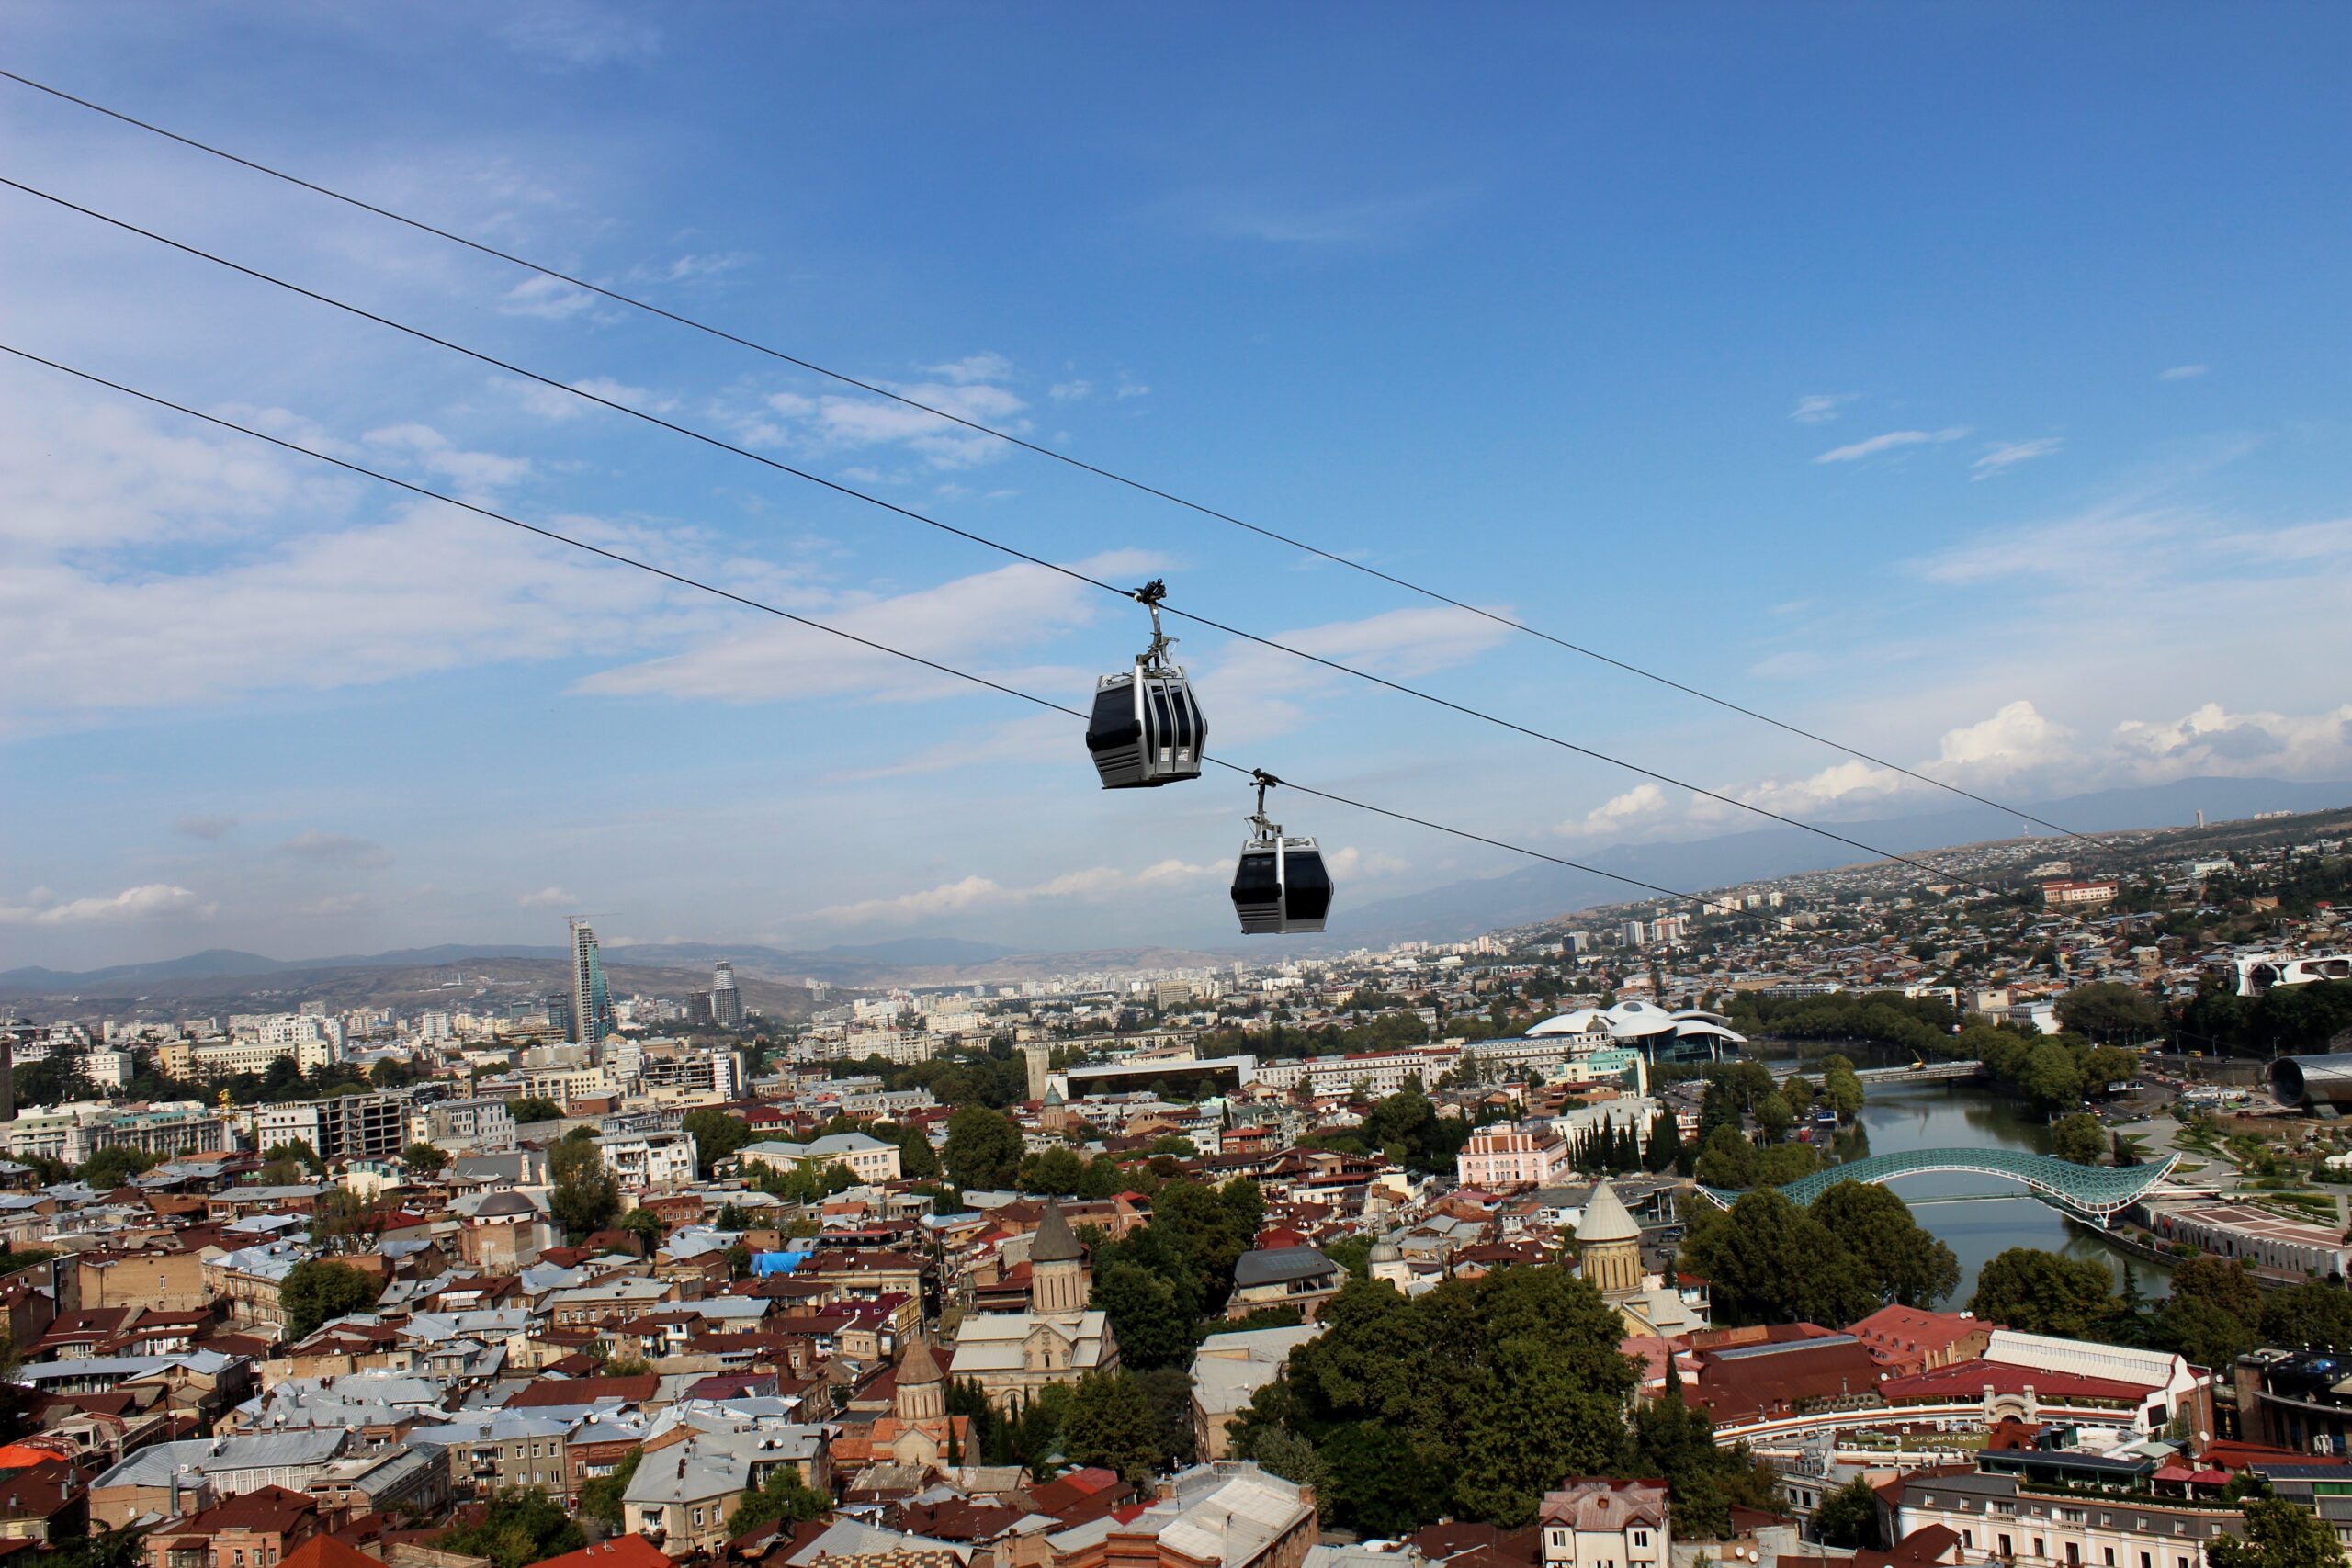 production-services-and-filming-in-georgia-via-swixer-cable-cars-over-city